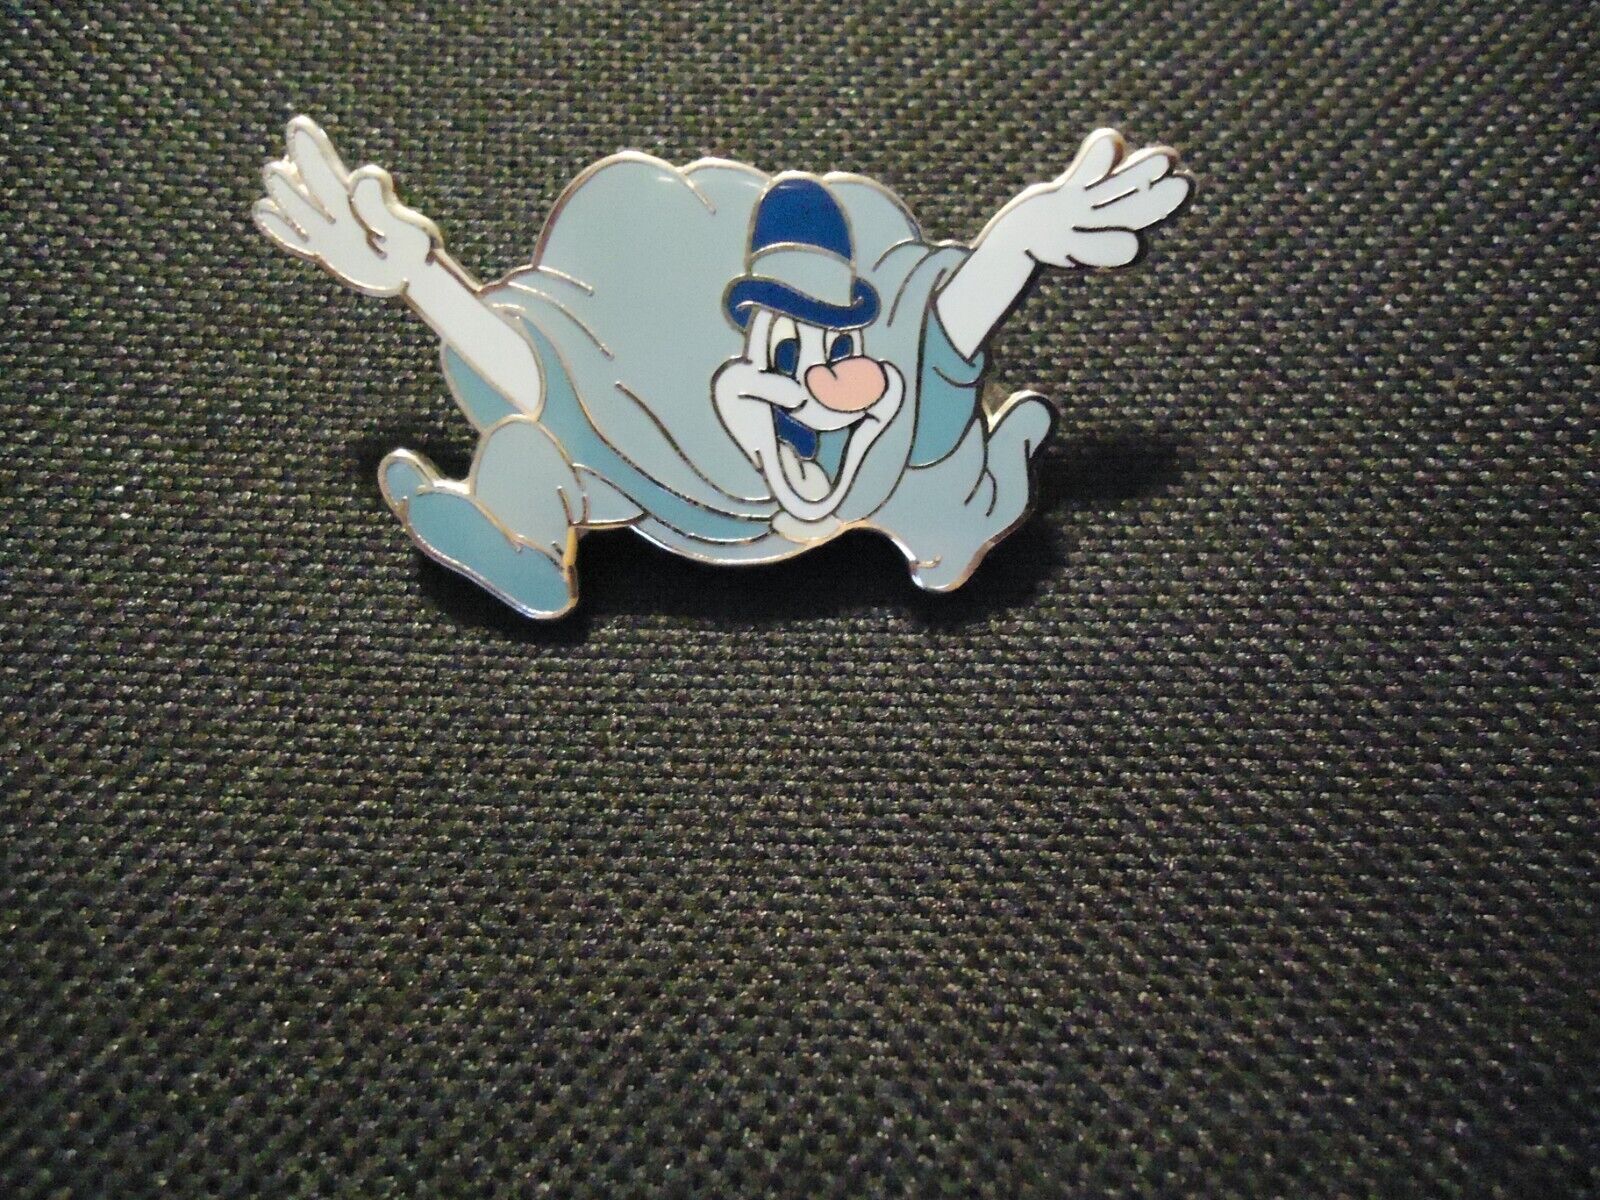 DISNEY WDW 999 HAPPY HAUNTS BALL CRAFTY GHOST FRAME SET LONESOME GHOST PIN LE 50